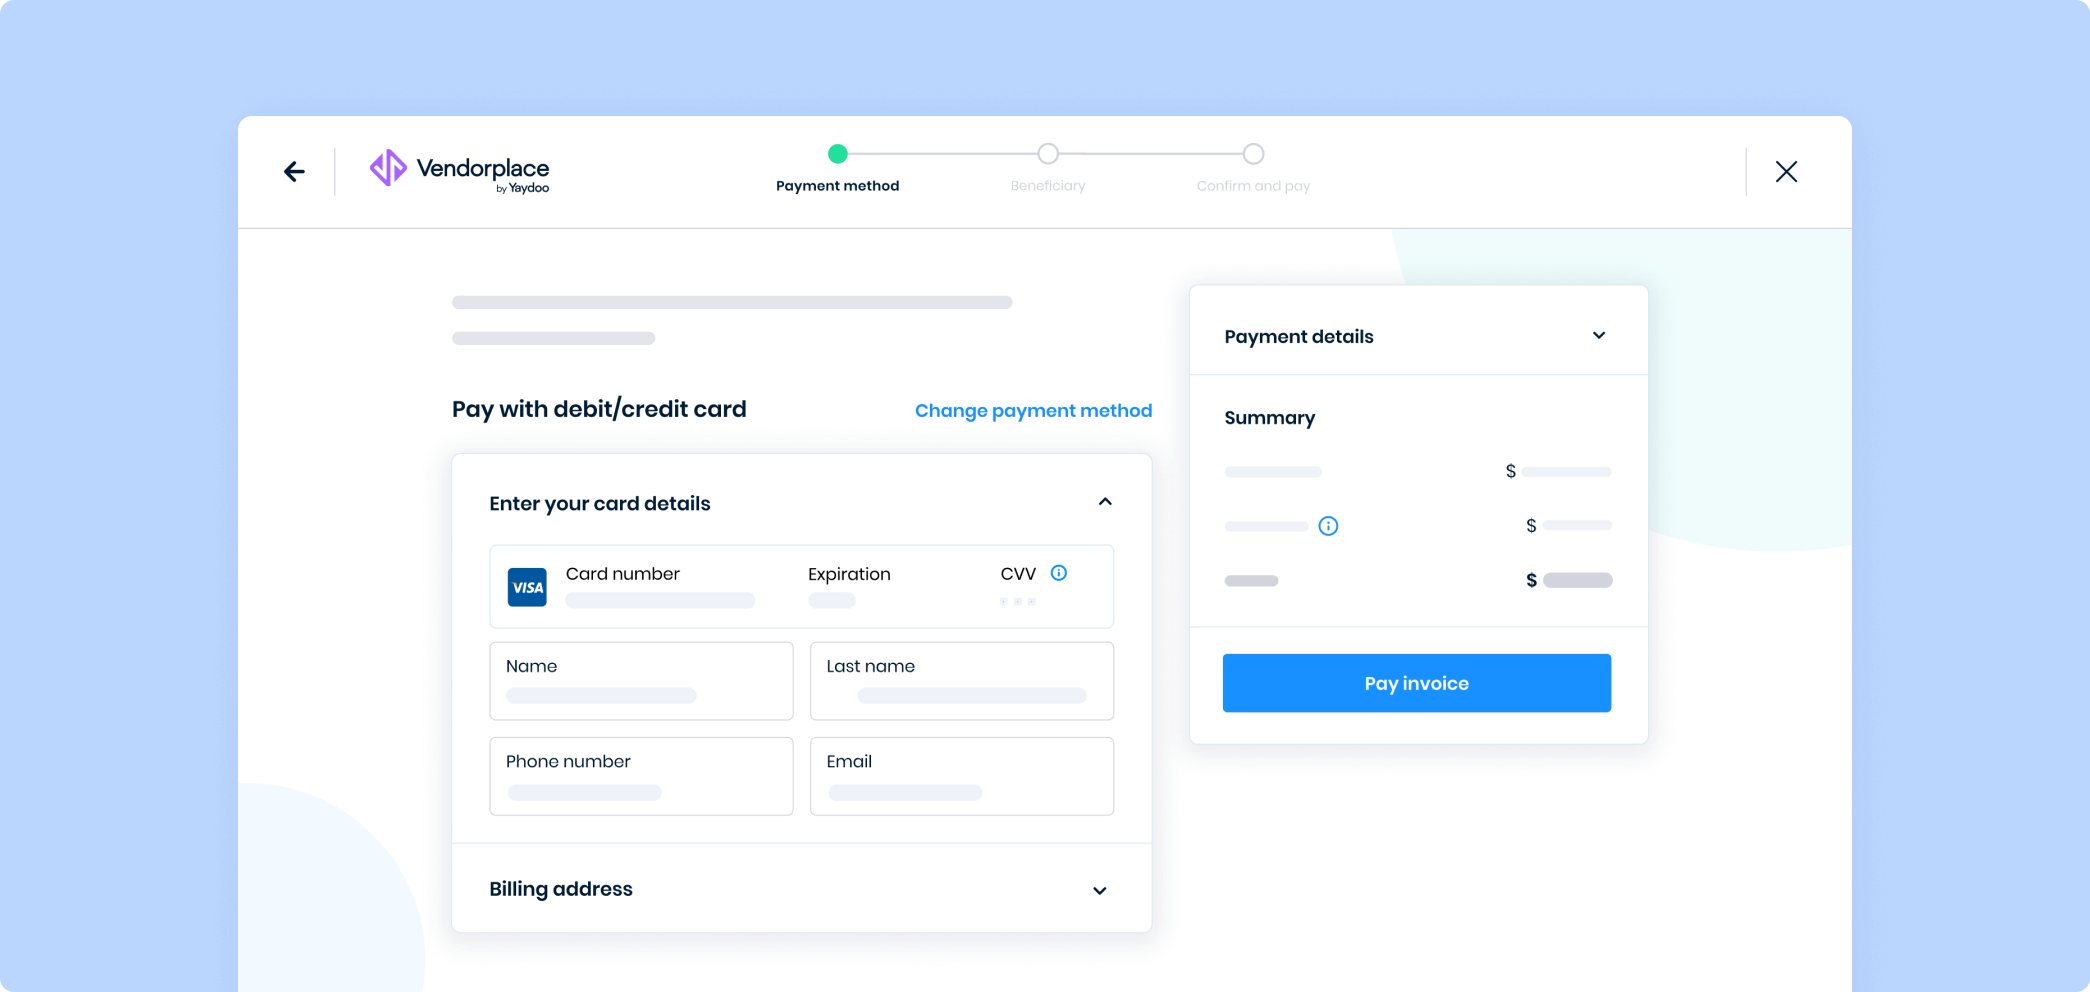 Payment requests